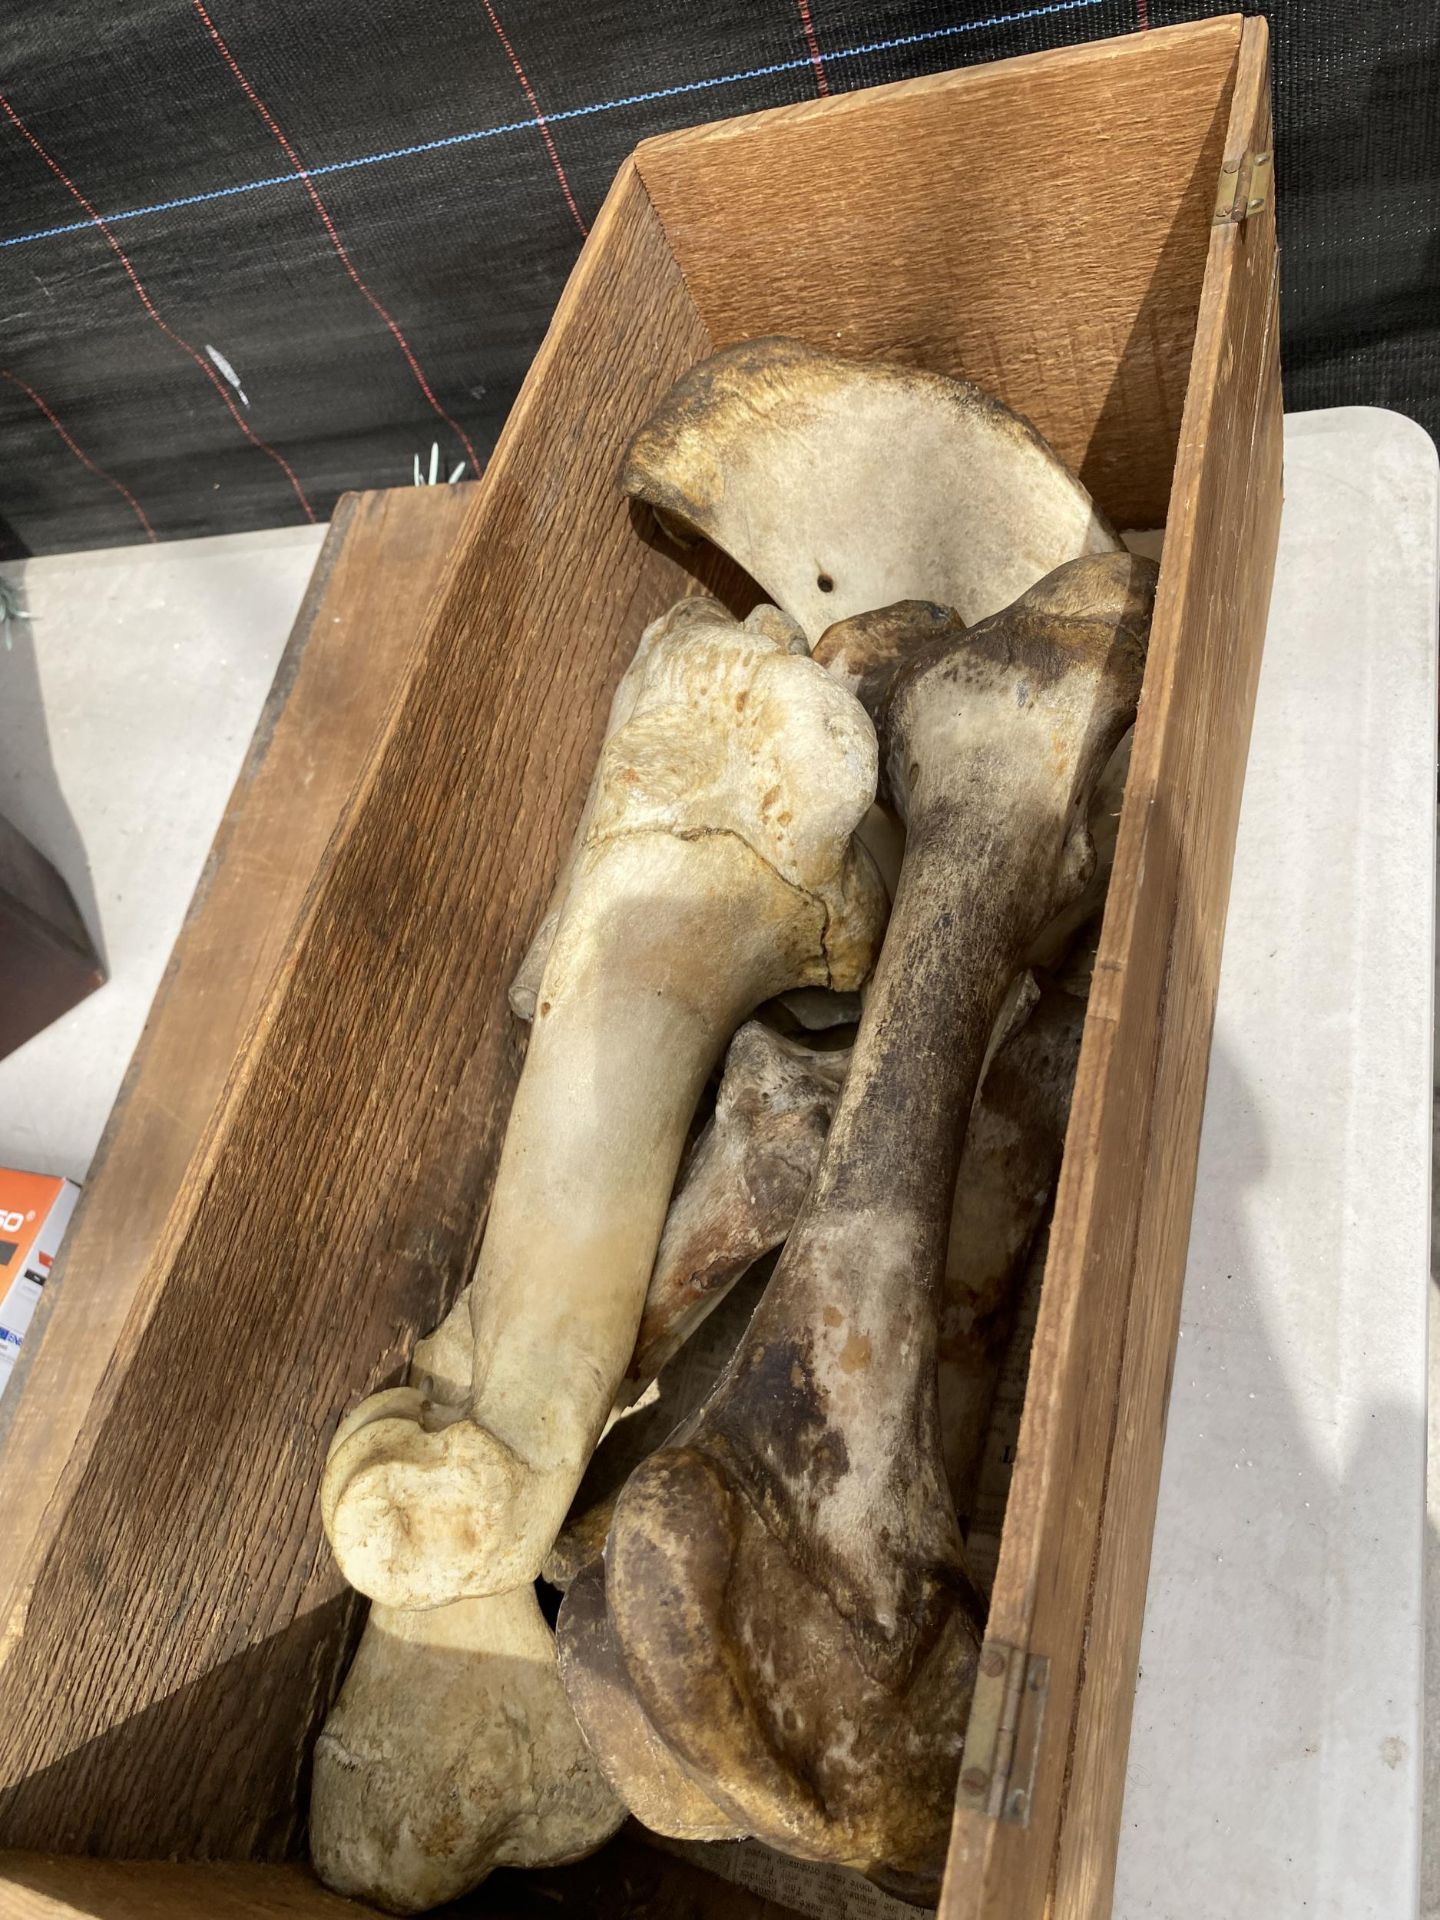 A WOODEN BOX CONTAINING AN ASSORTMENT OF BONES - Image 2 of 2